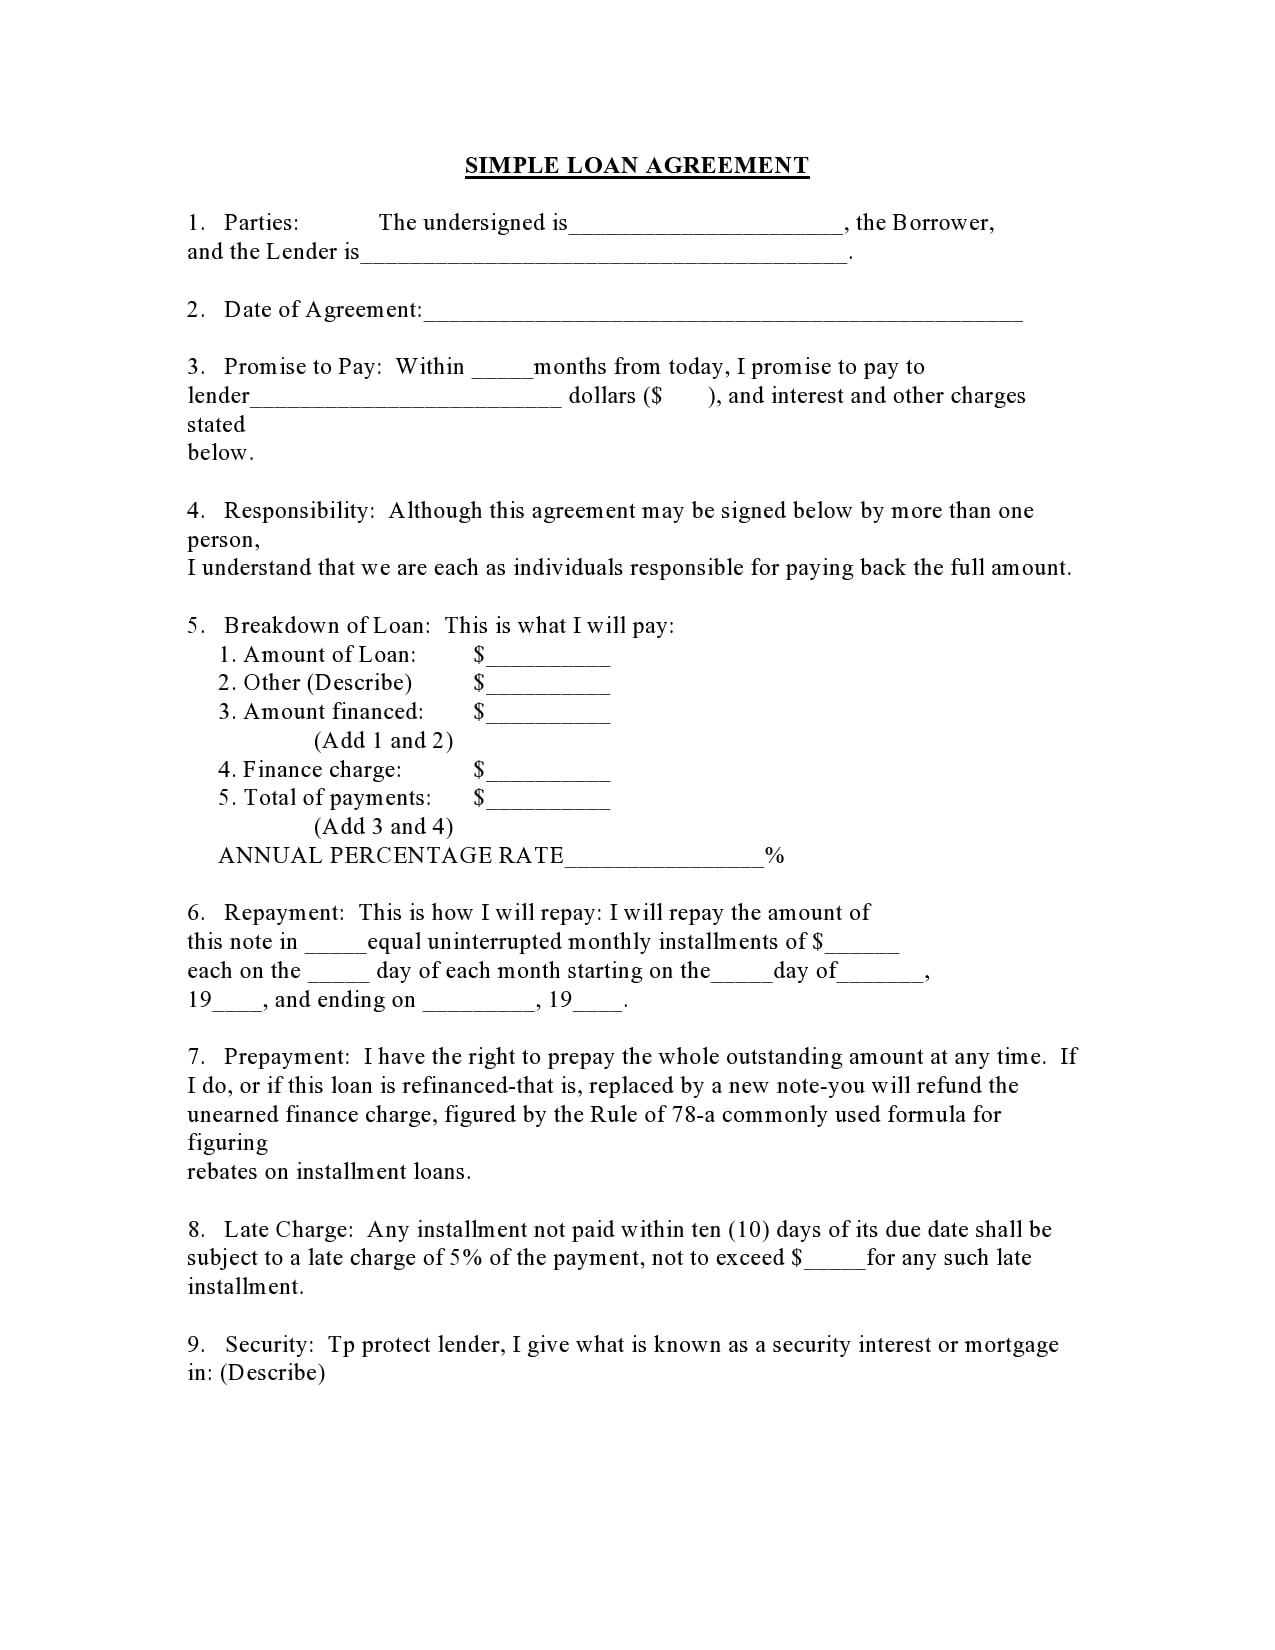 22 Simple Family Loan Agreement Templates (22% Free) With personal loan repayment agreement template